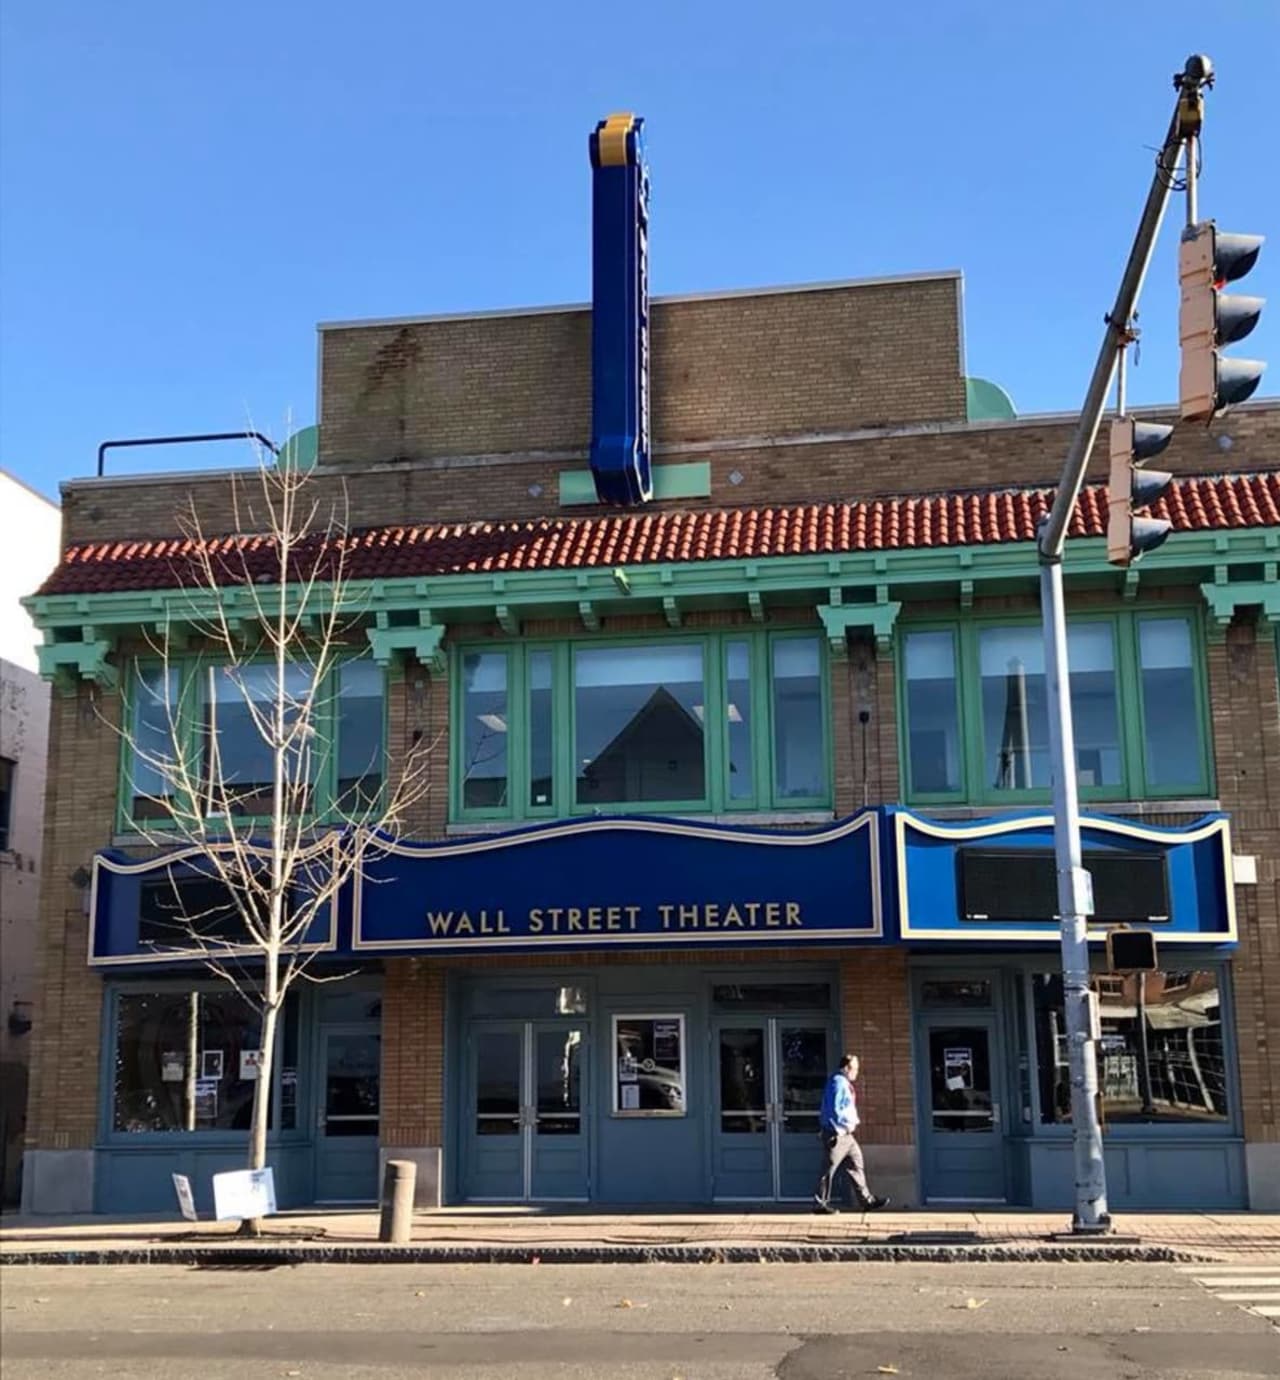 The Wall Street Theater in Norwalk will celebrate the lighting of its marquee on Friday evening.